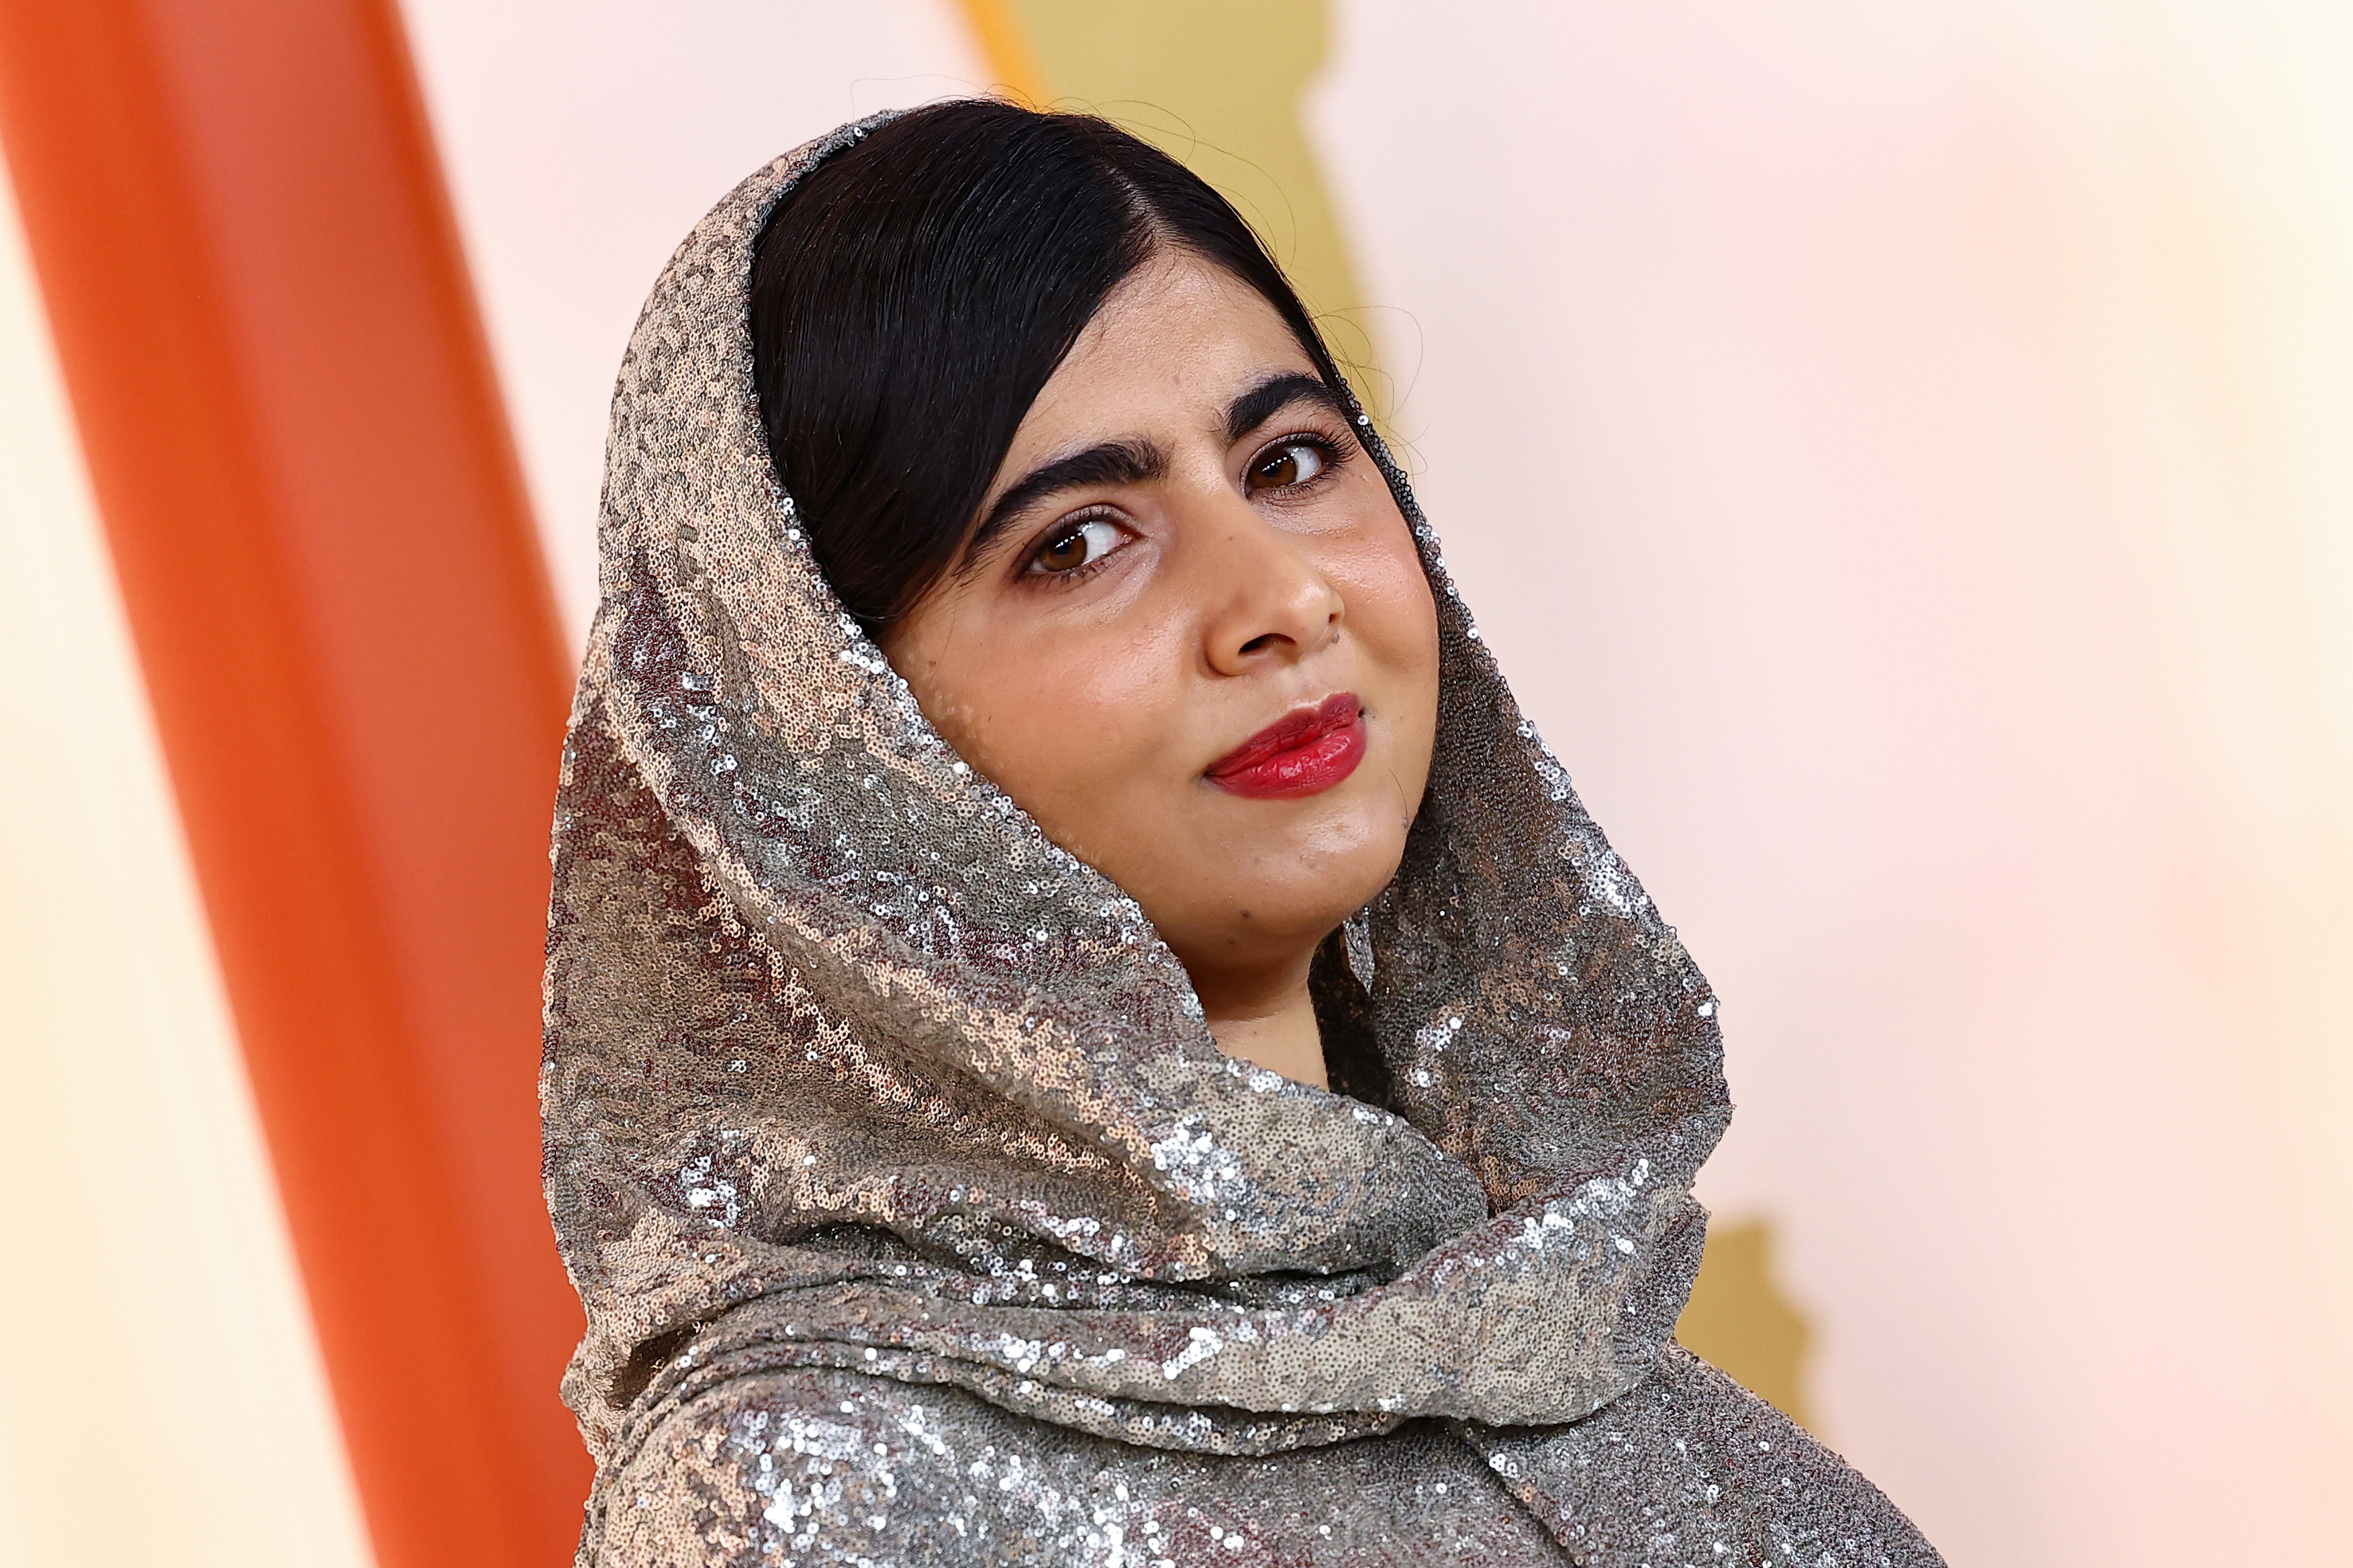 Malala Yousafzai attends the 95th Annual Academy Awards on March 12, 2023 in Hollywood, California. (Photo by Arturo Holmes/Getty Images )